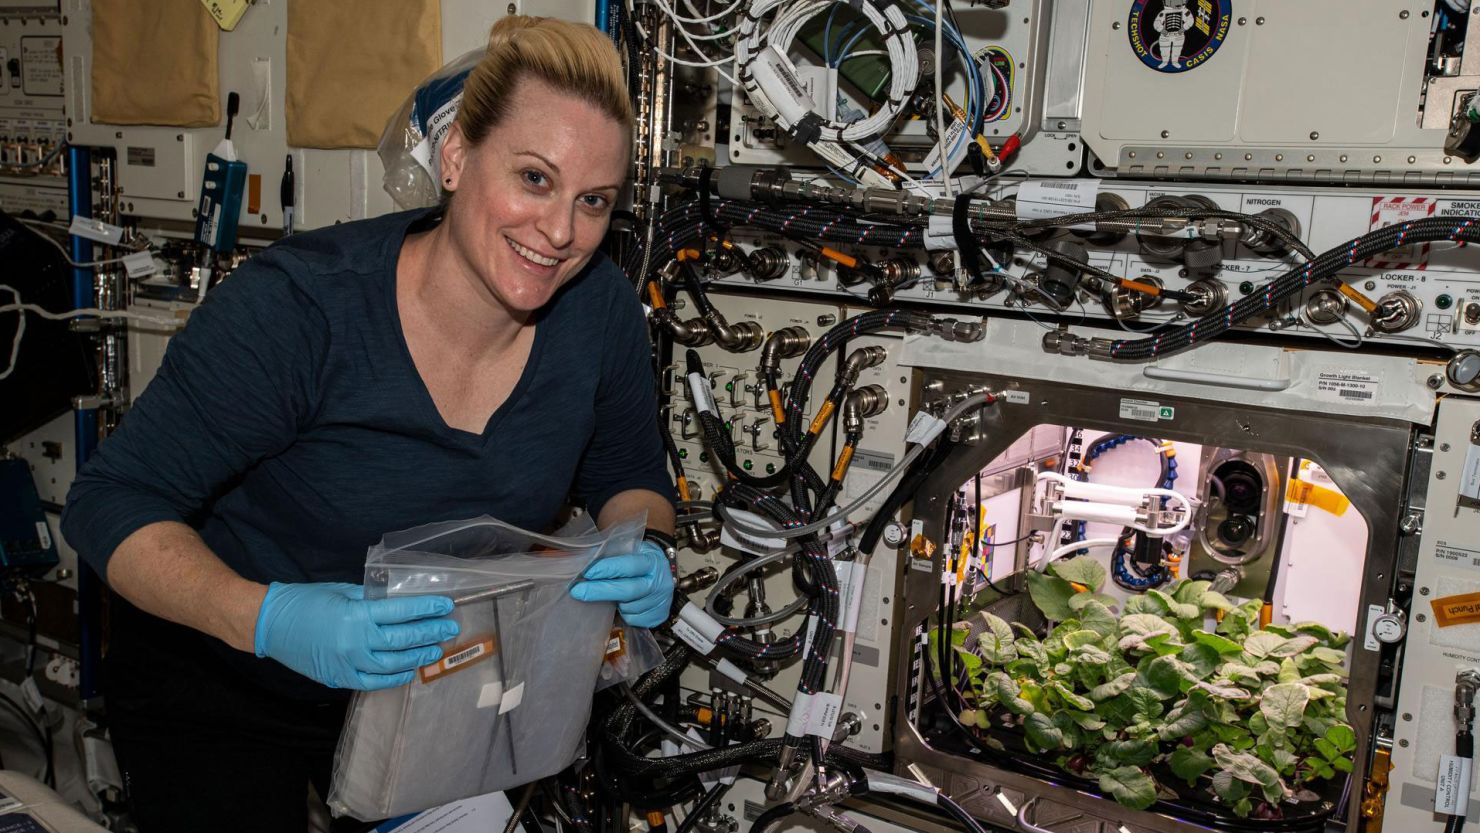 NASA astronaut and flight engineer Kate Rubins checks out radish plants growing on the space station as part of an experiment to evaluate nutrition and taste of the plants.